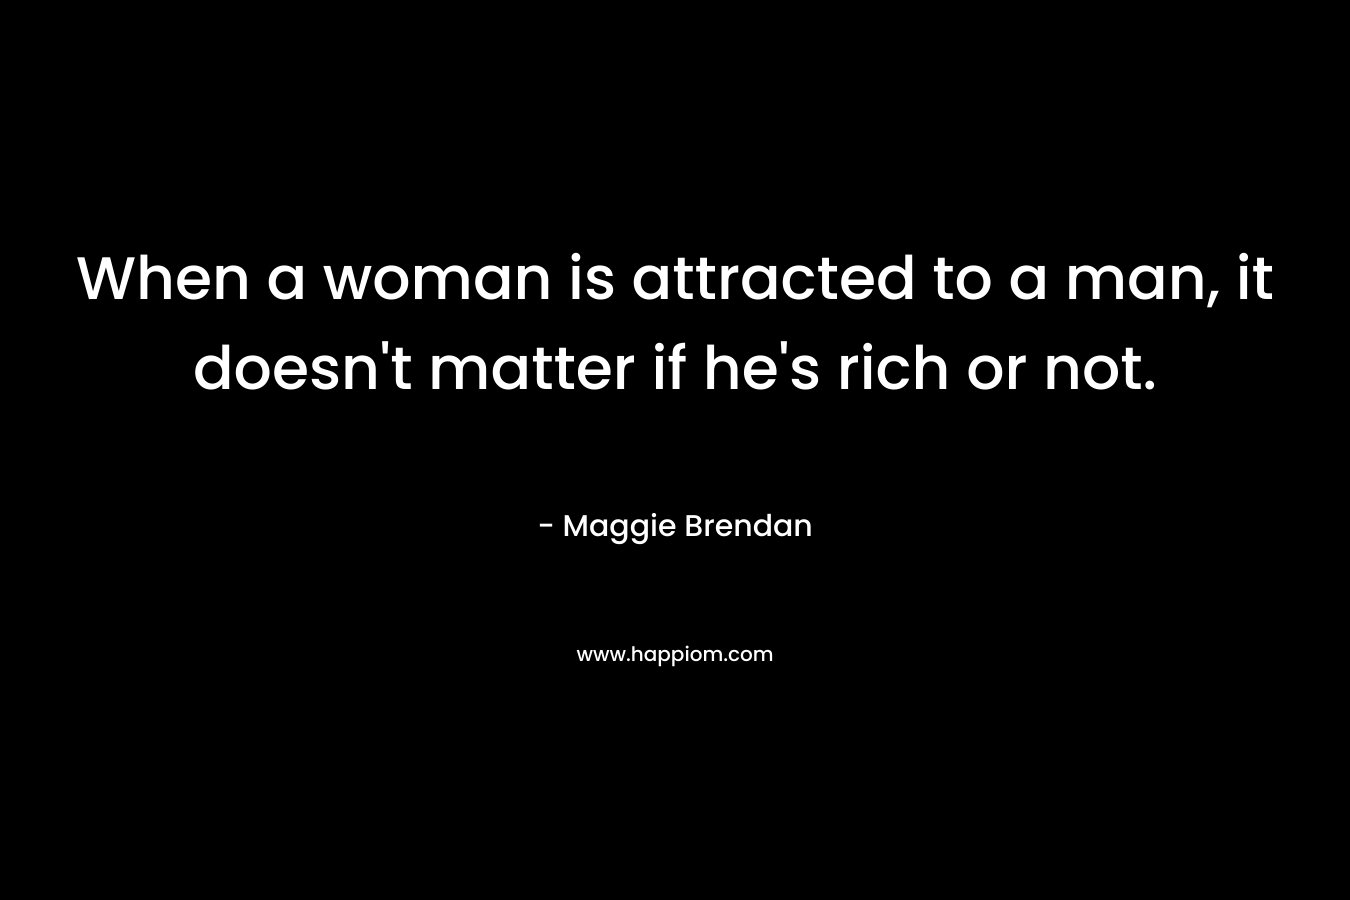 When a woman is attracted to a man, it doesn’t matter if he’s rich or not. – Maggie Brendan